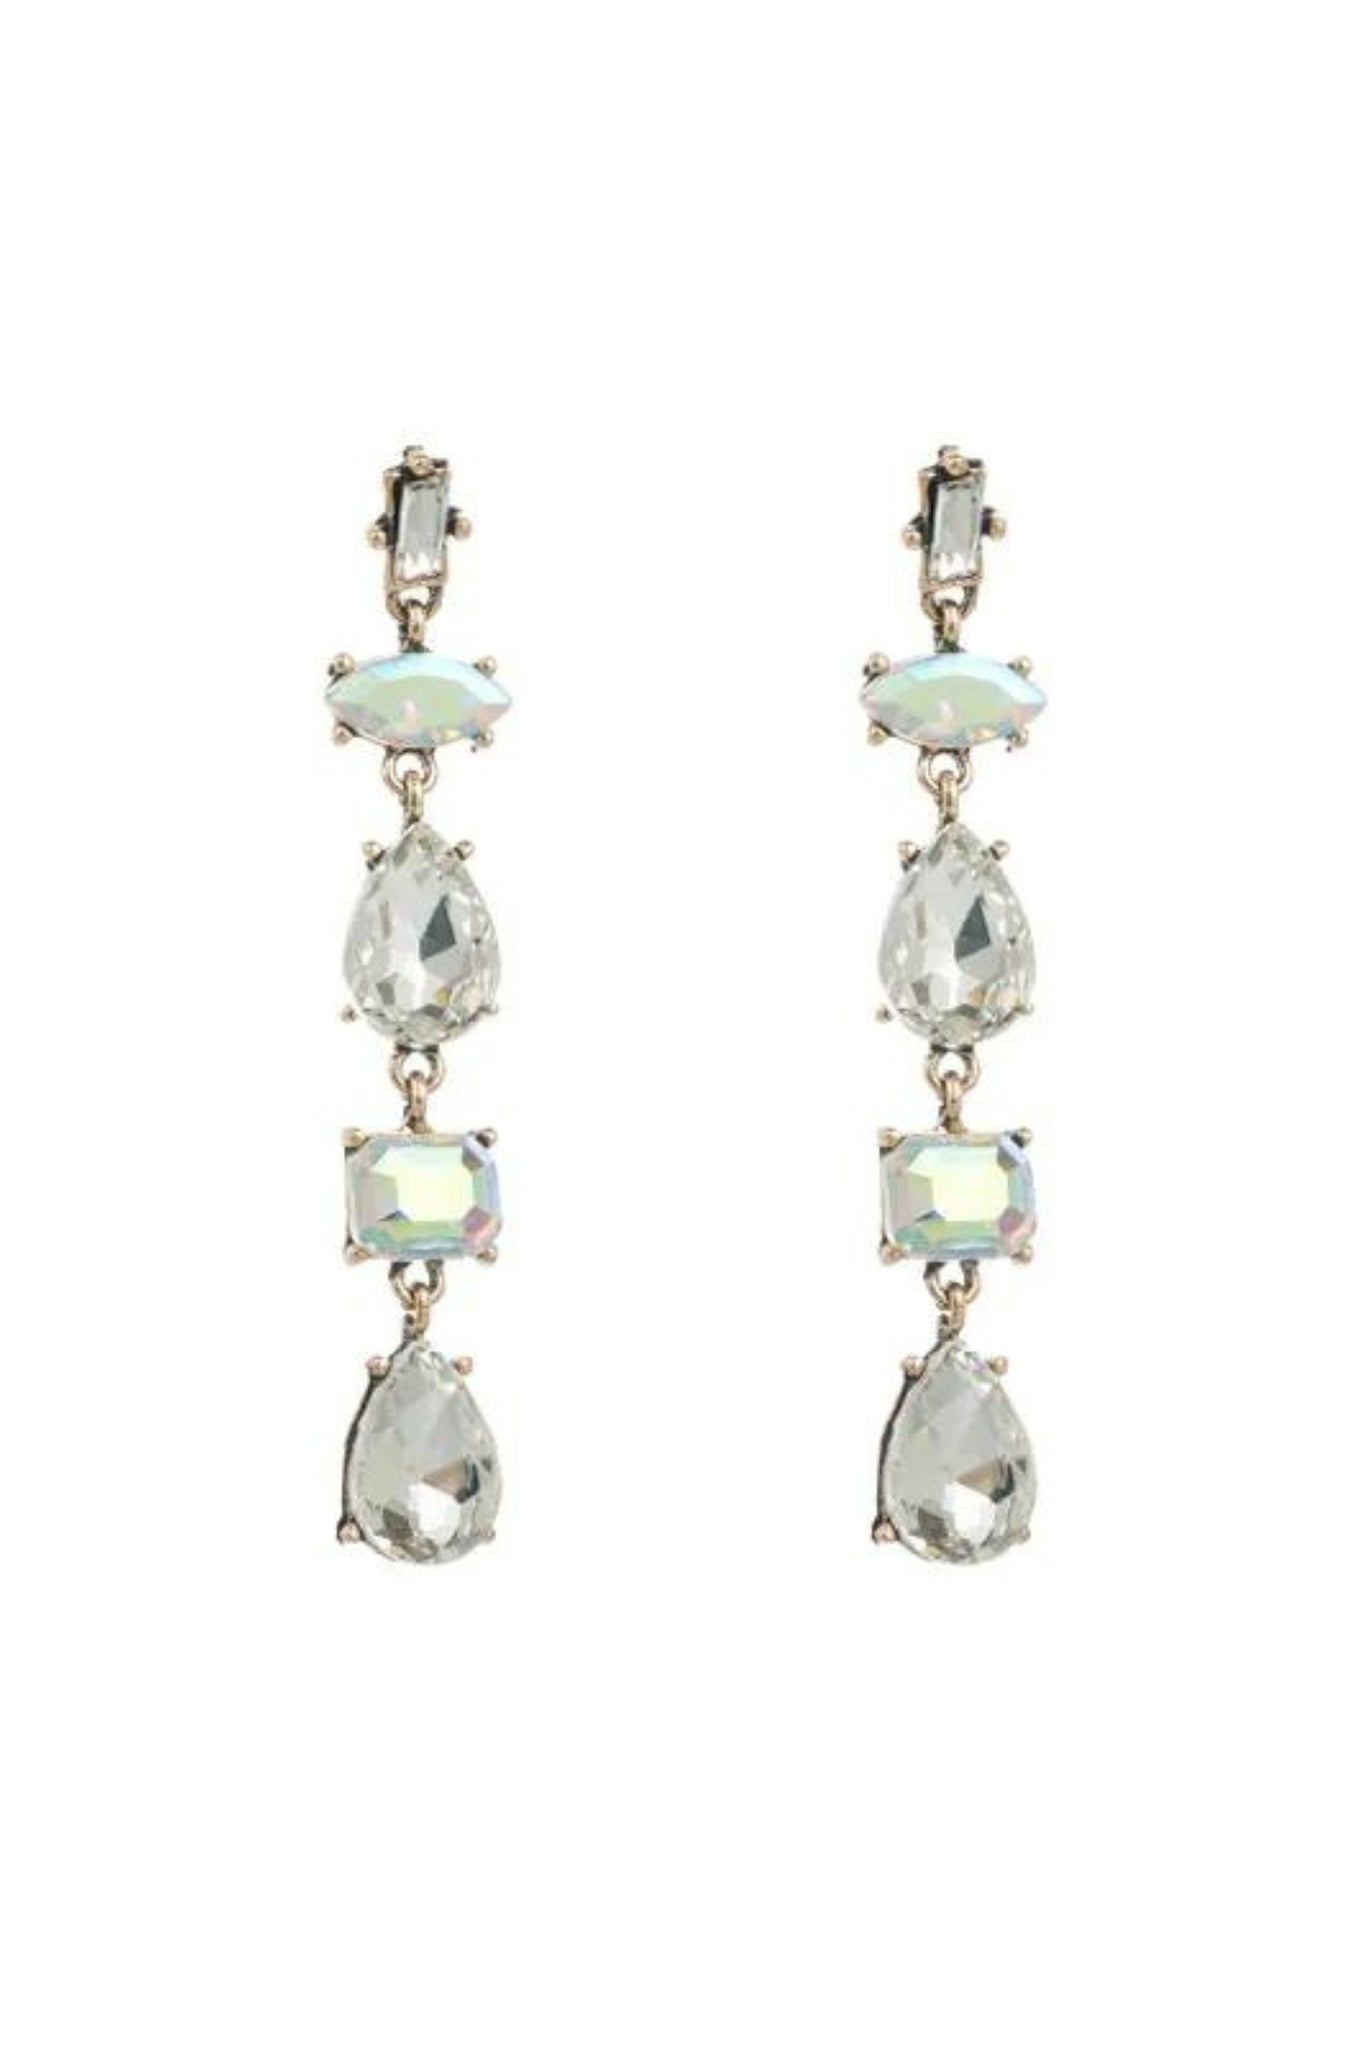 Molly Crystal Drop Event Earrings - Iridescent Clear